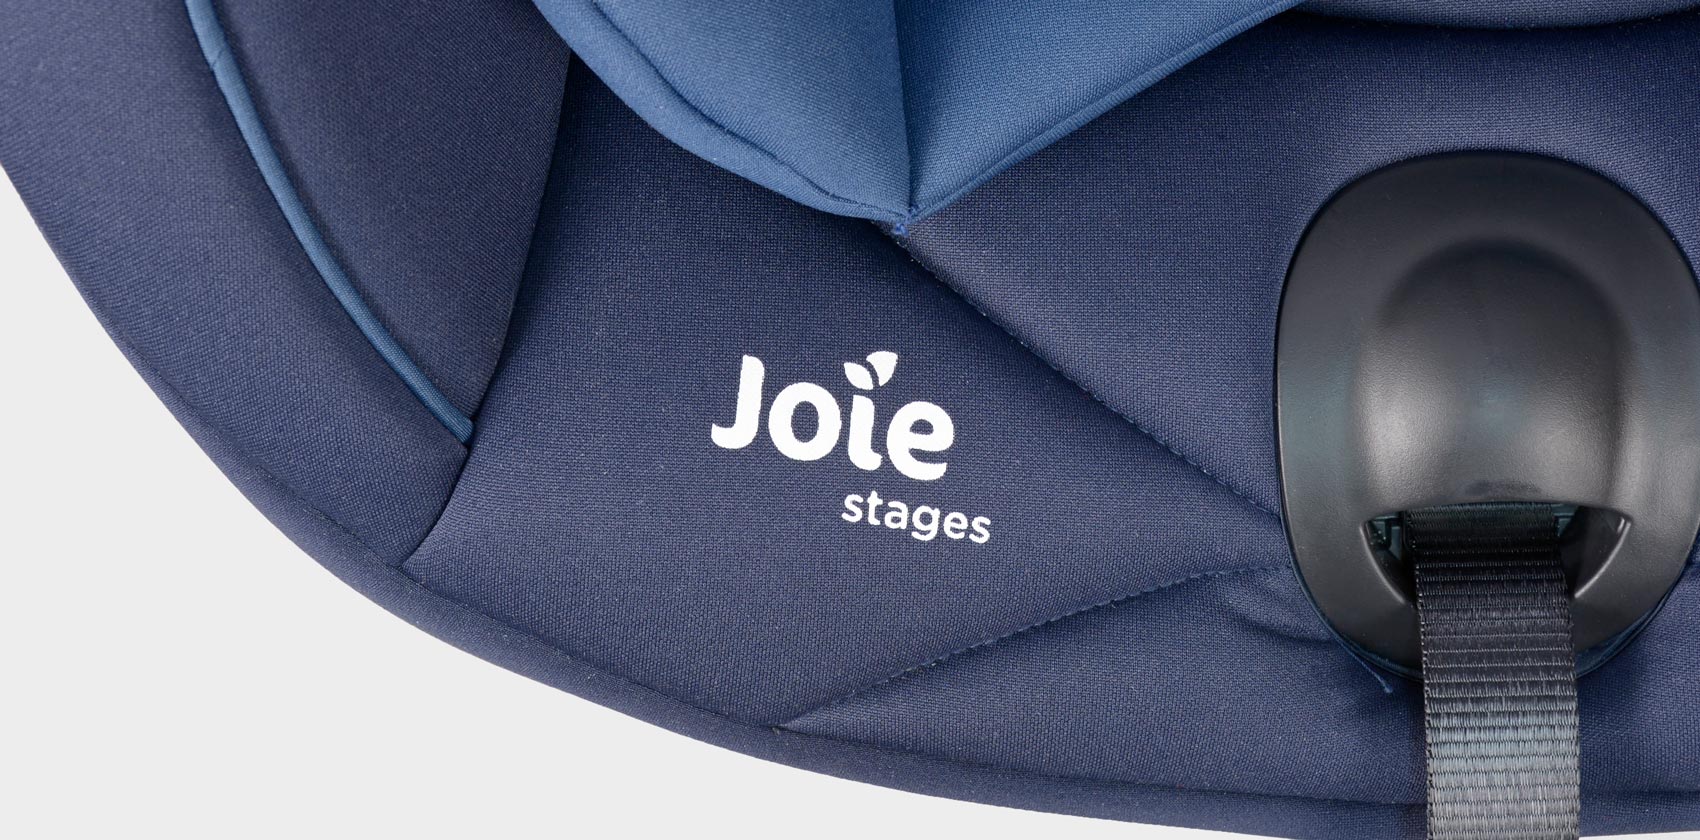 Joie Stages ткани